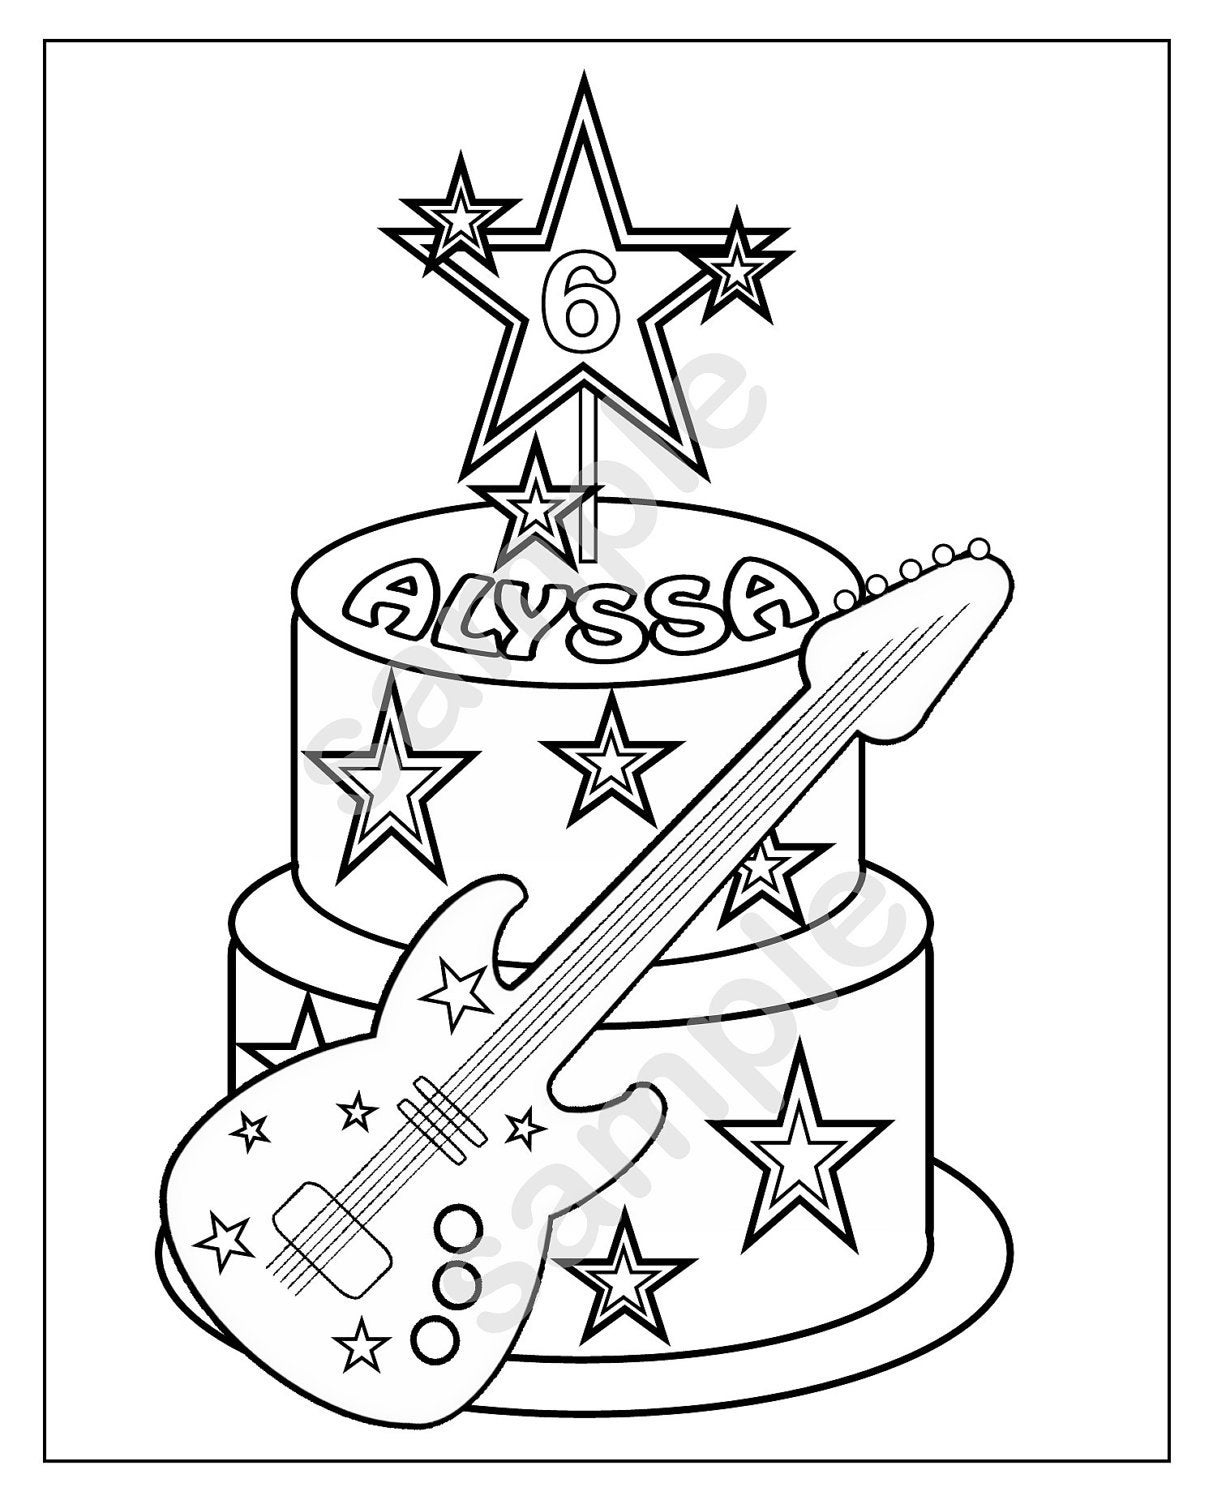 Personalized Printable Rockstar Birthday Party Favor childrens kids coloring  page book activity PDF or JPEG file